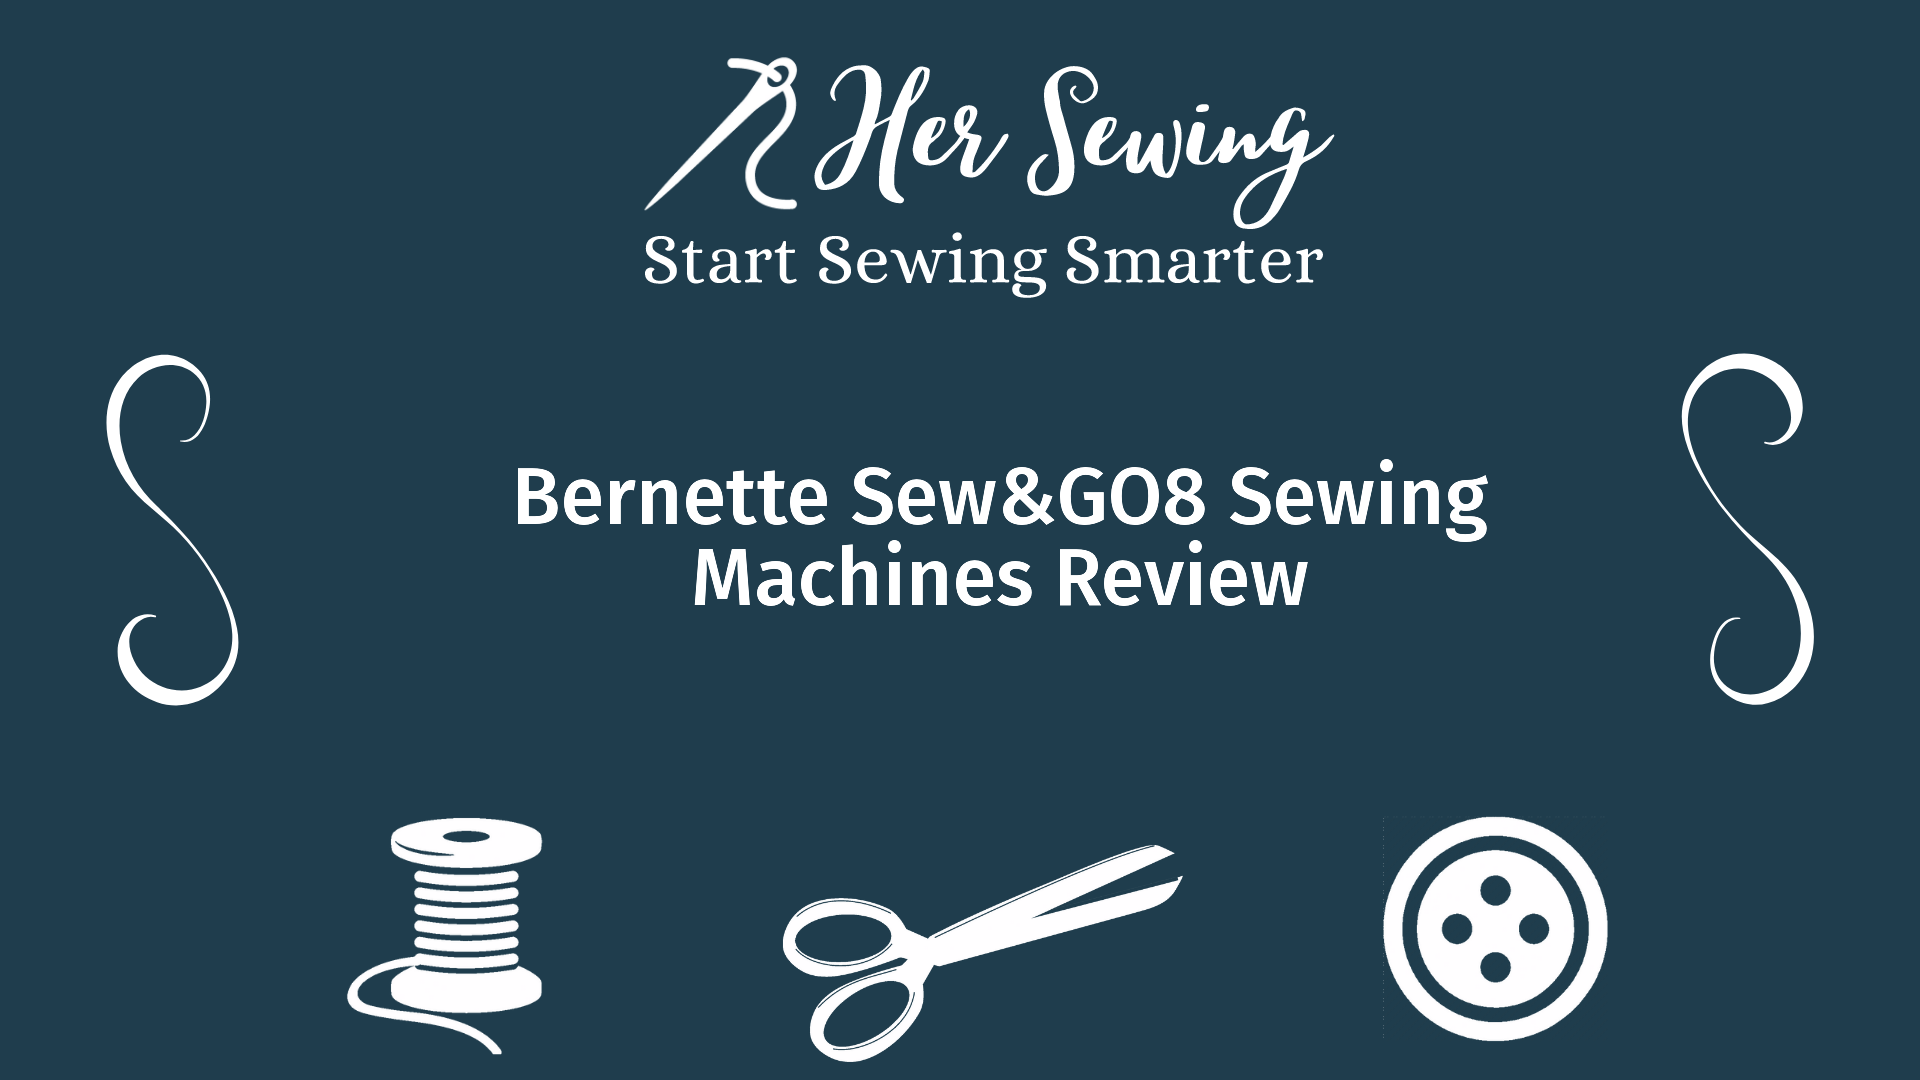 Bernette Sew&GO8 Sewing Machines Review